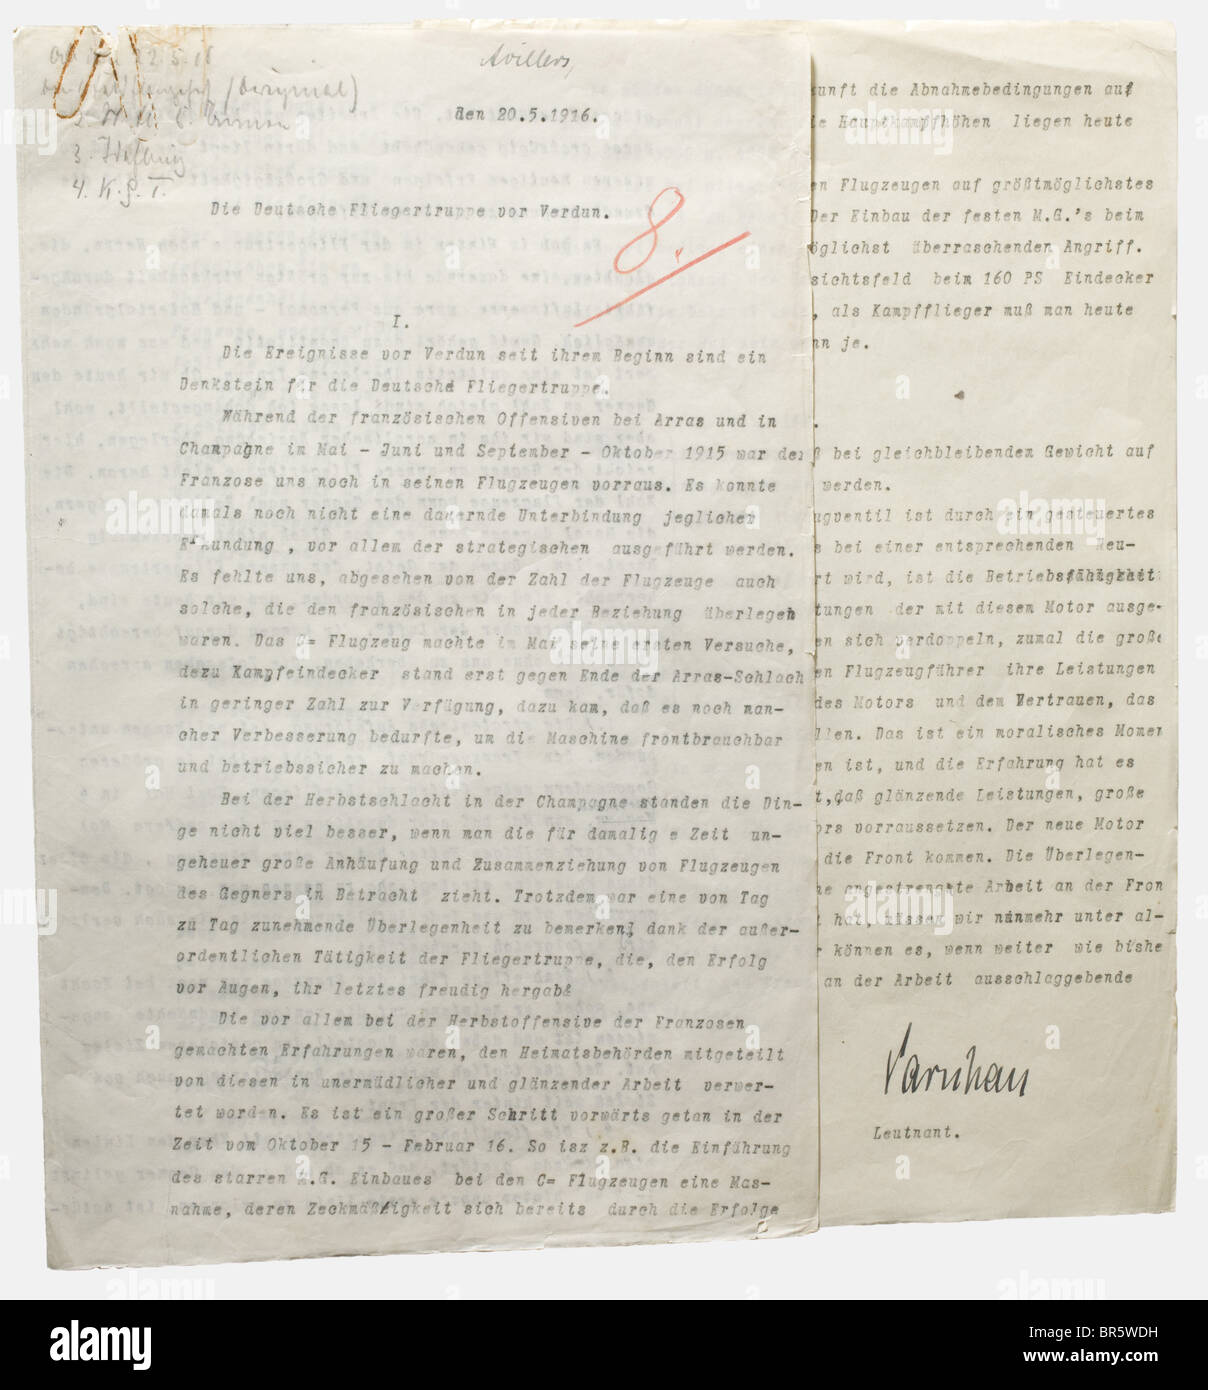 Lieutenant Otto Parschau (1890 - 1916), a memorandum on the armament of the Air Service Five-page typewritten memorandum (carbon copy) dealing with the technical requirements in air combat at the Western front, dated 20.5.1916 and titled 'The German aviation group at Verdun'. According to a marginal note, the original copy went to the head of the Army Air Service. The last page with Parschau's signature in ink. Otto Eduard Parschau received the 455th pilot licence in Johannisthal in 1913 and was a successful participant in a number of flight competitions. Durin, Stock Photo